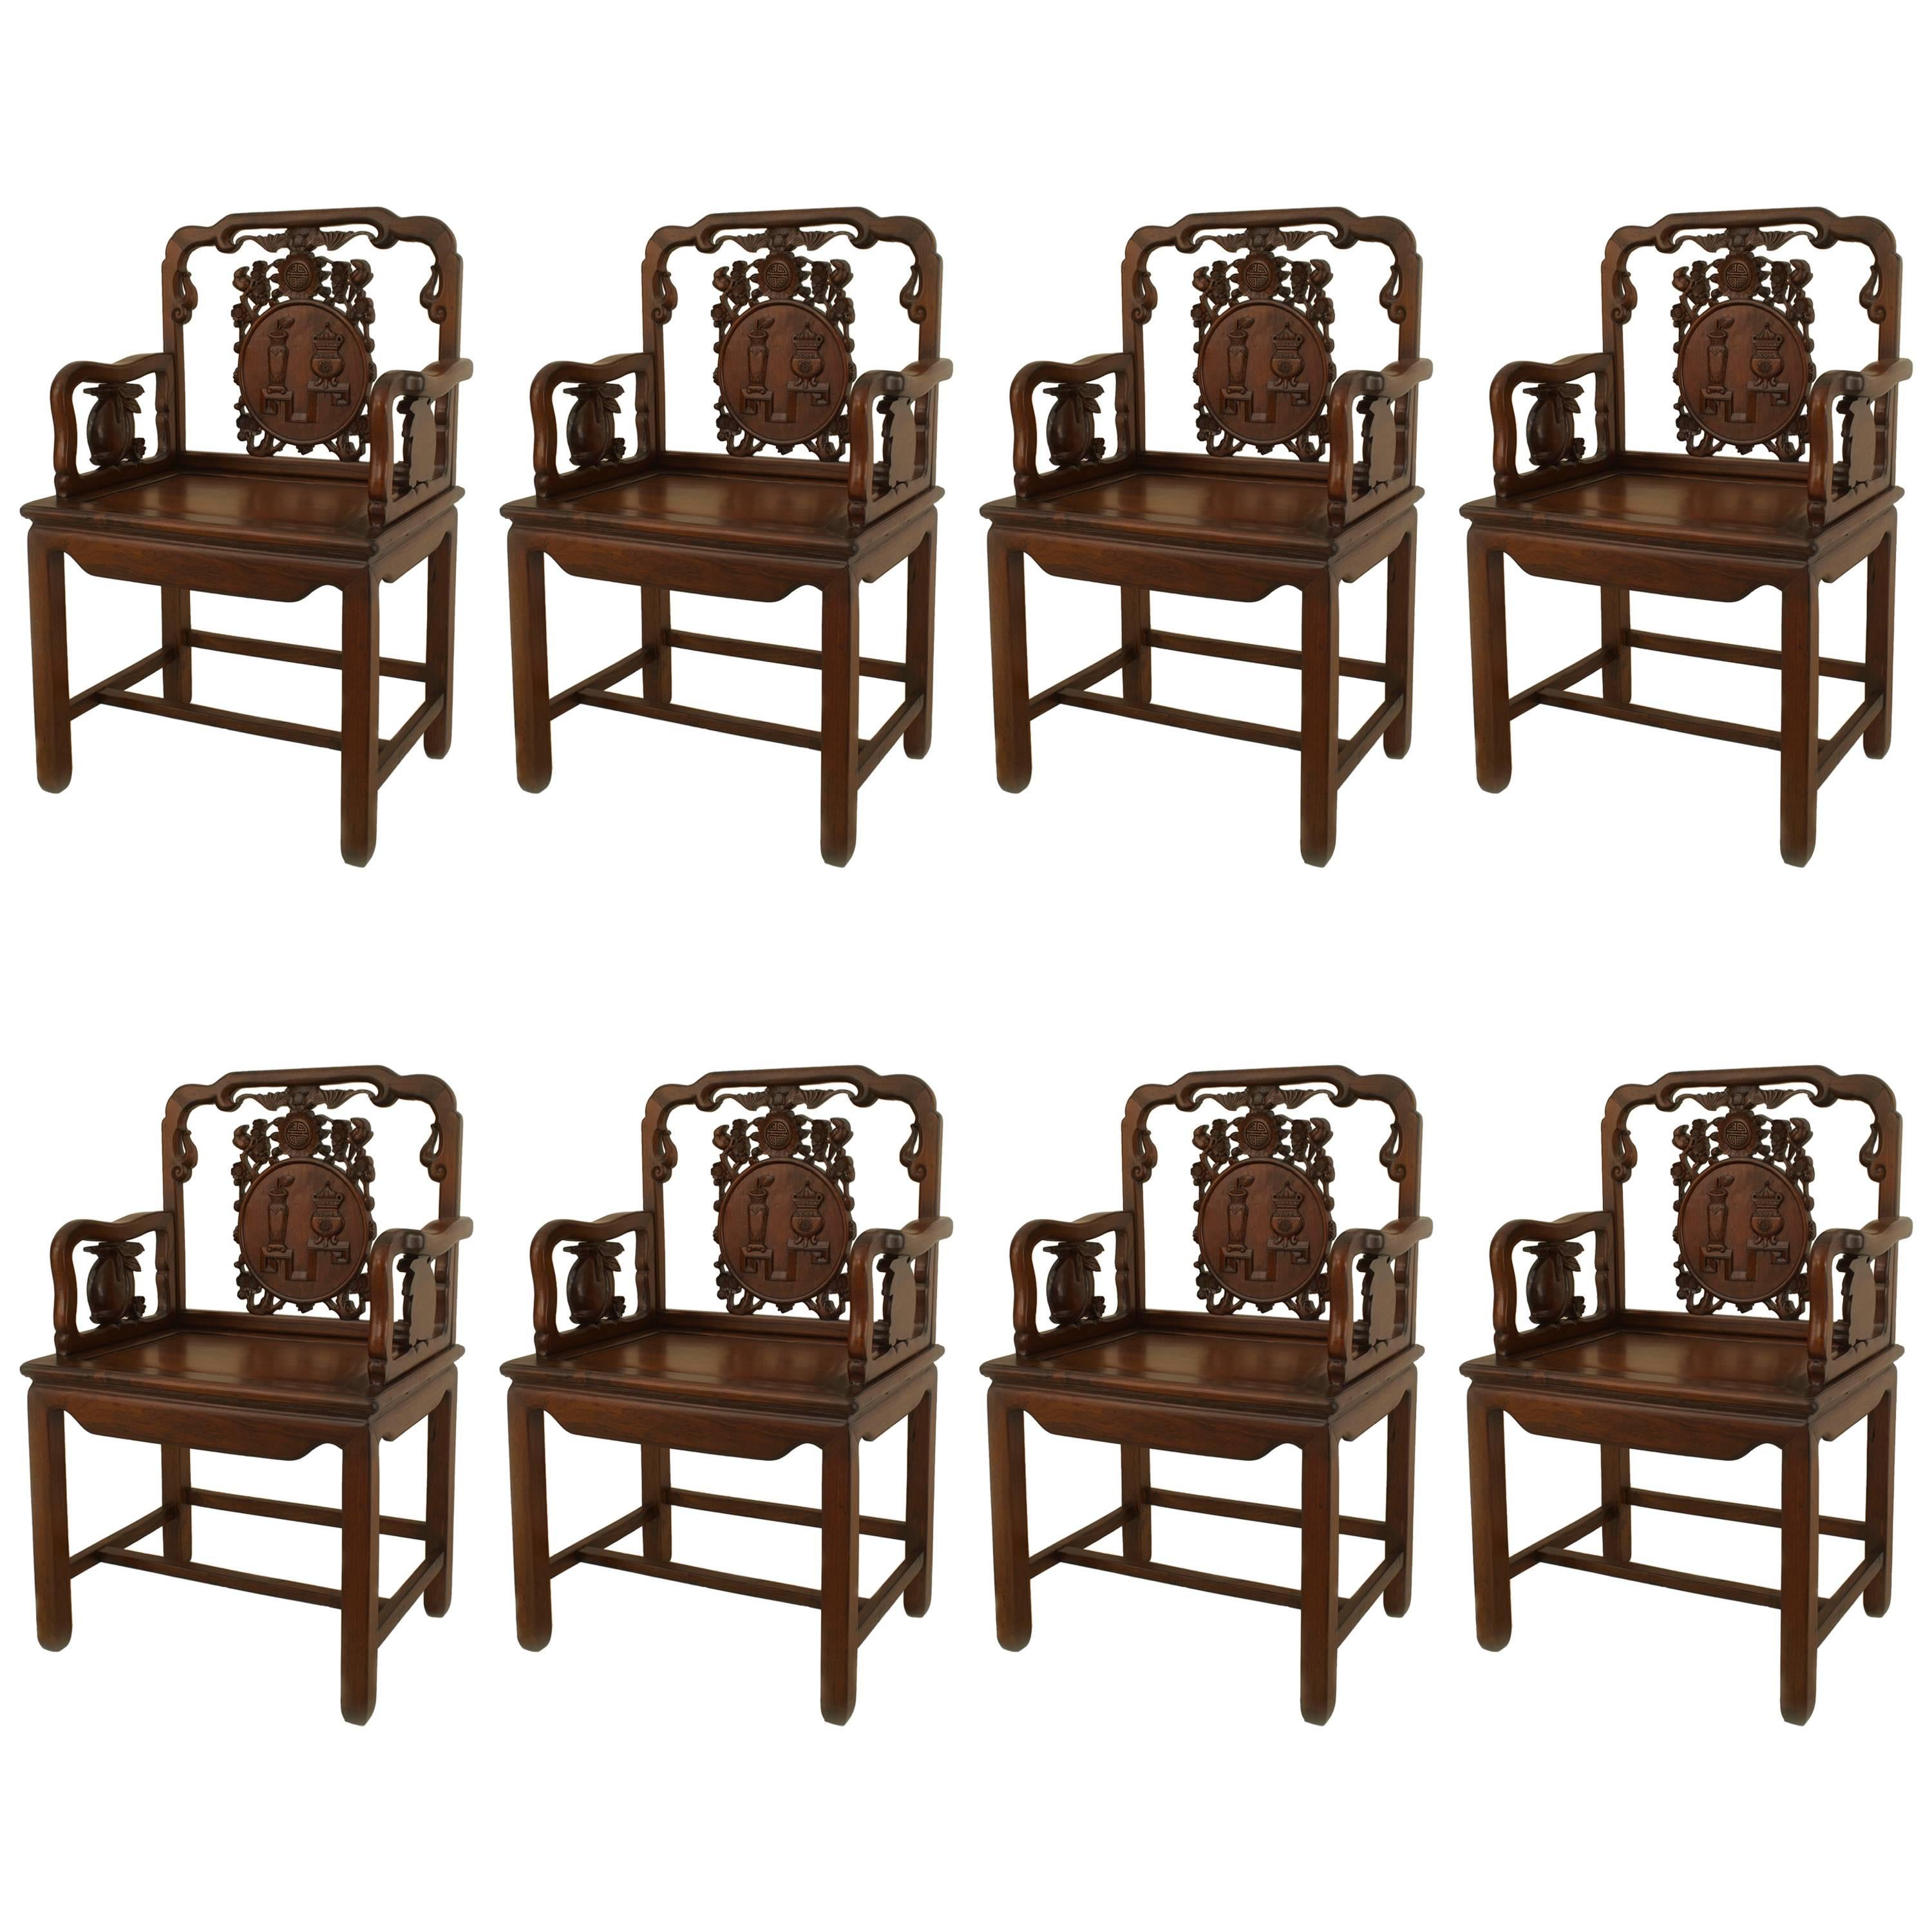 Set of 8 Chinese Rosewood Carved Arm Chairs